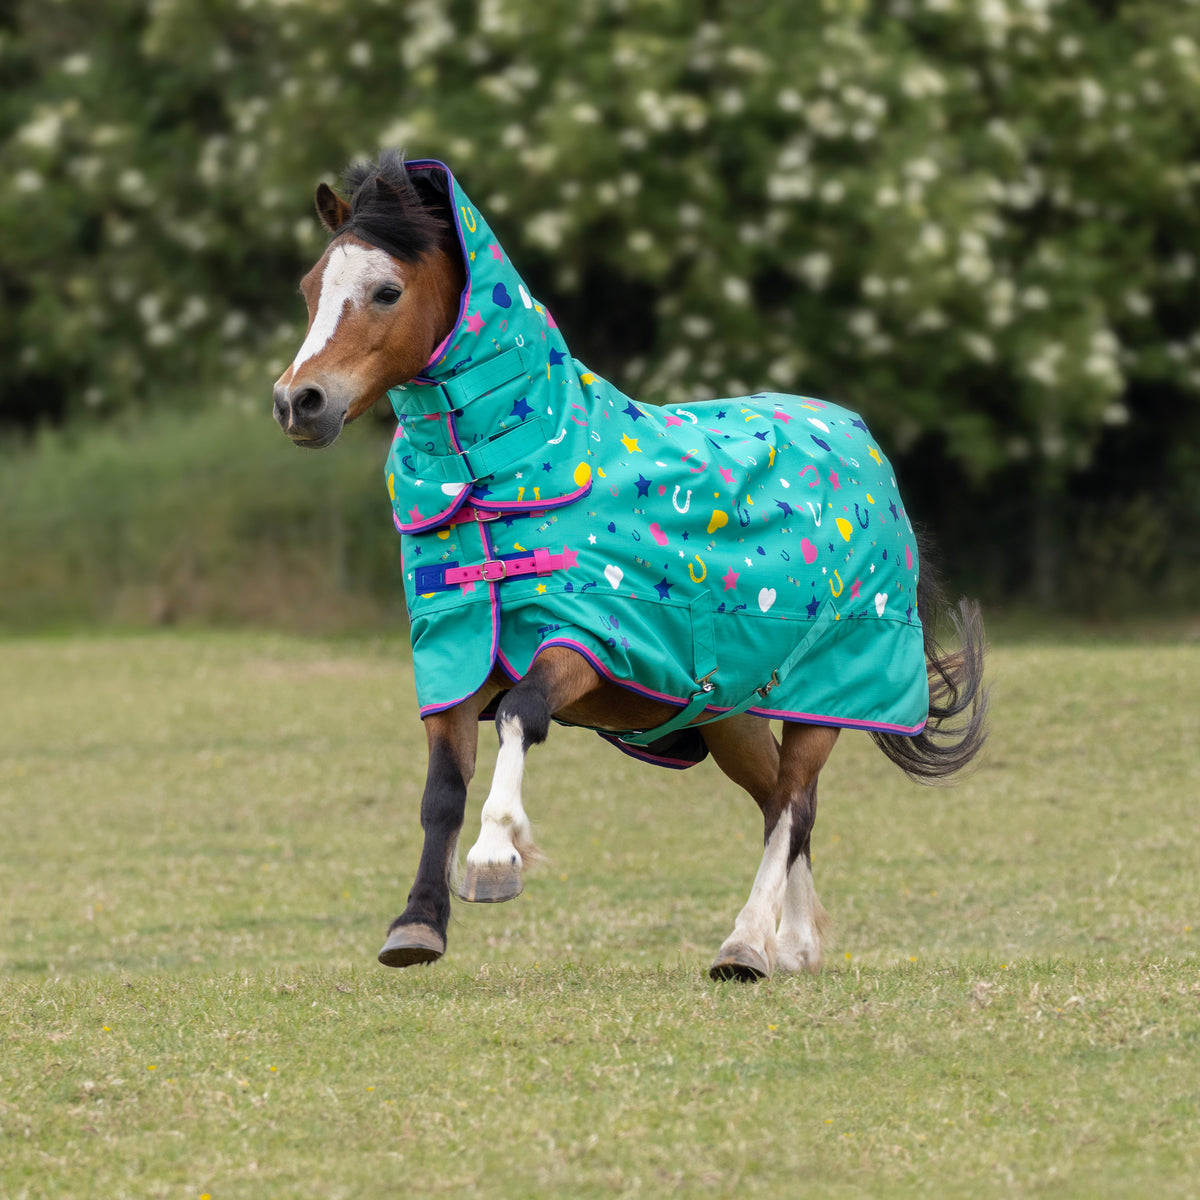 Shires Tikaboo 200g Combo Turnout Rug